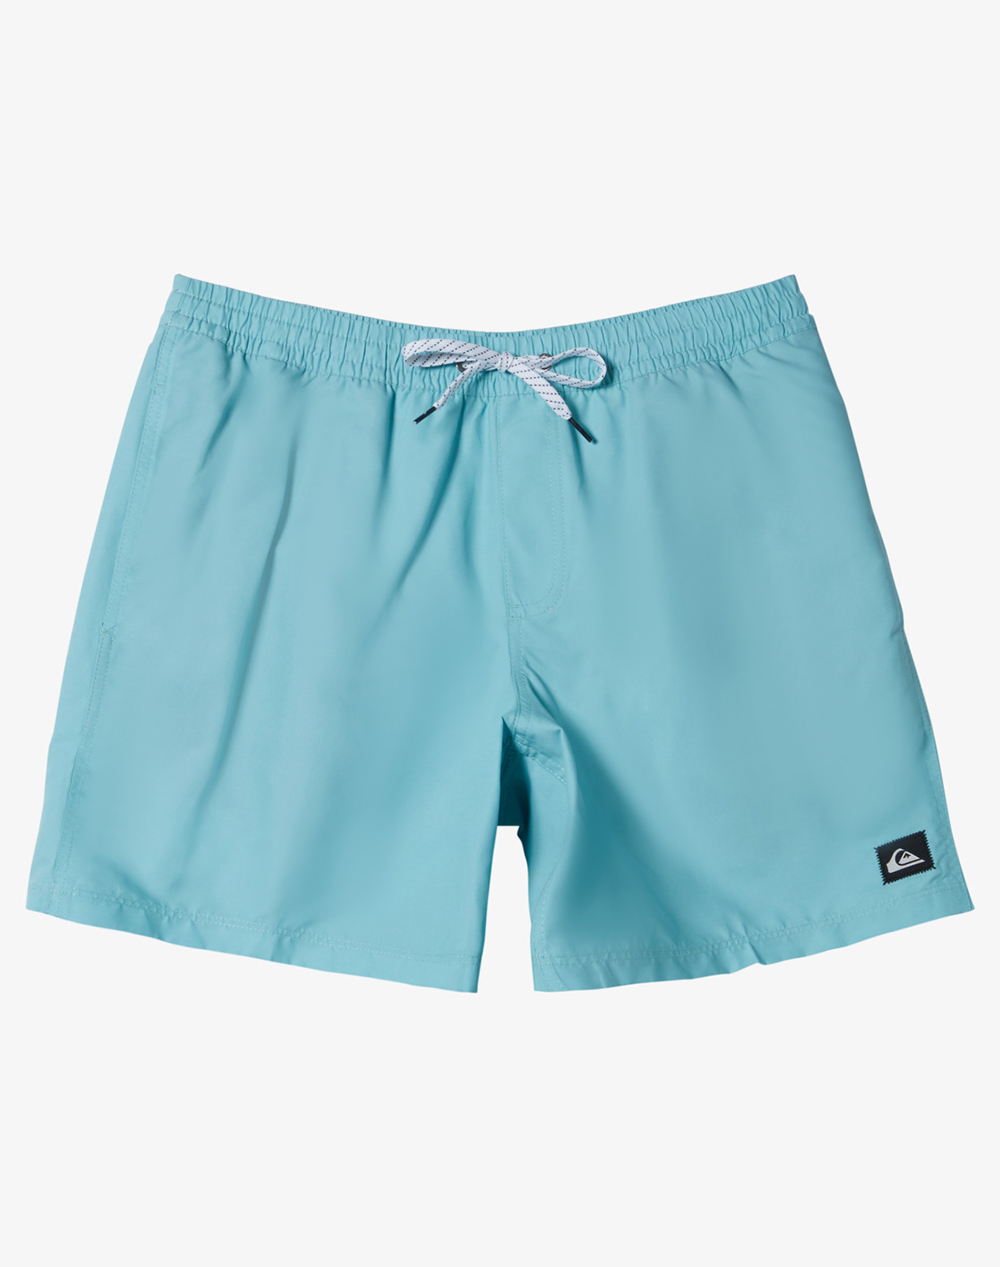 QUIKSILVER EVERYDAY SOLID VOLLEY 15 ΜΑΓΙΟ ΑΝΔΡΙΚΟ